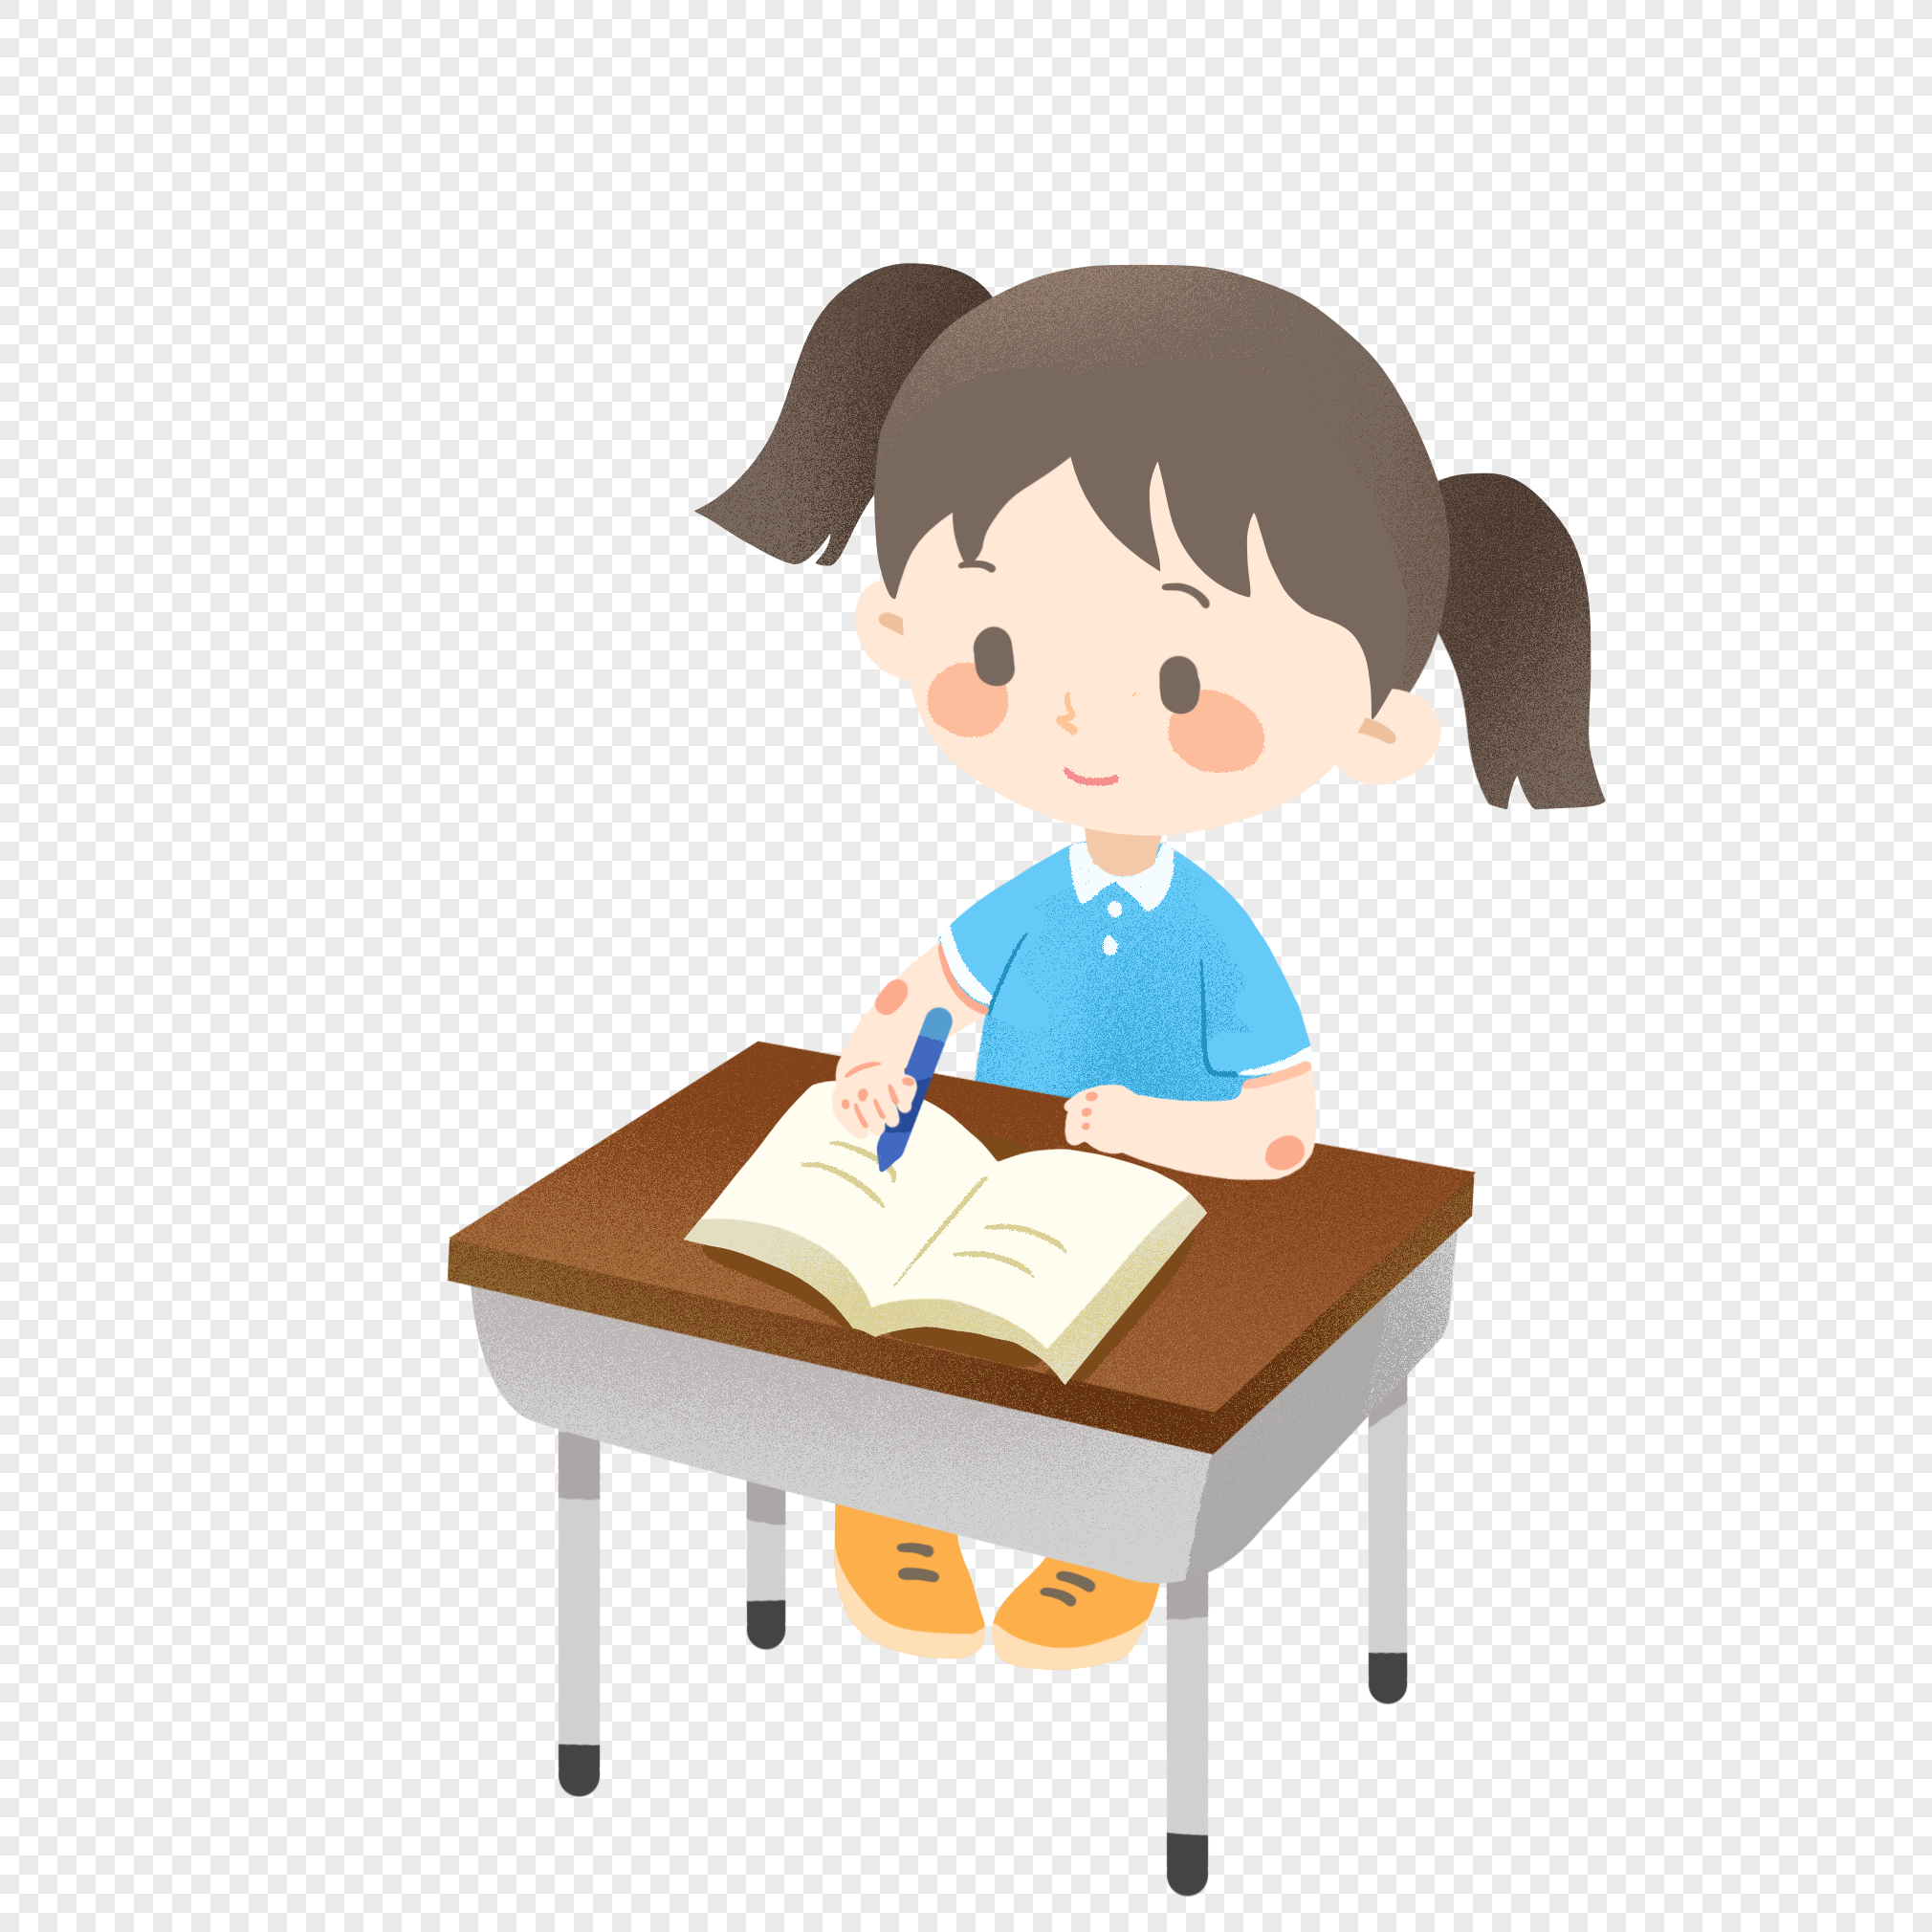 Girls who are doing homework during the school quarter, student, and homework, desk png transparent background